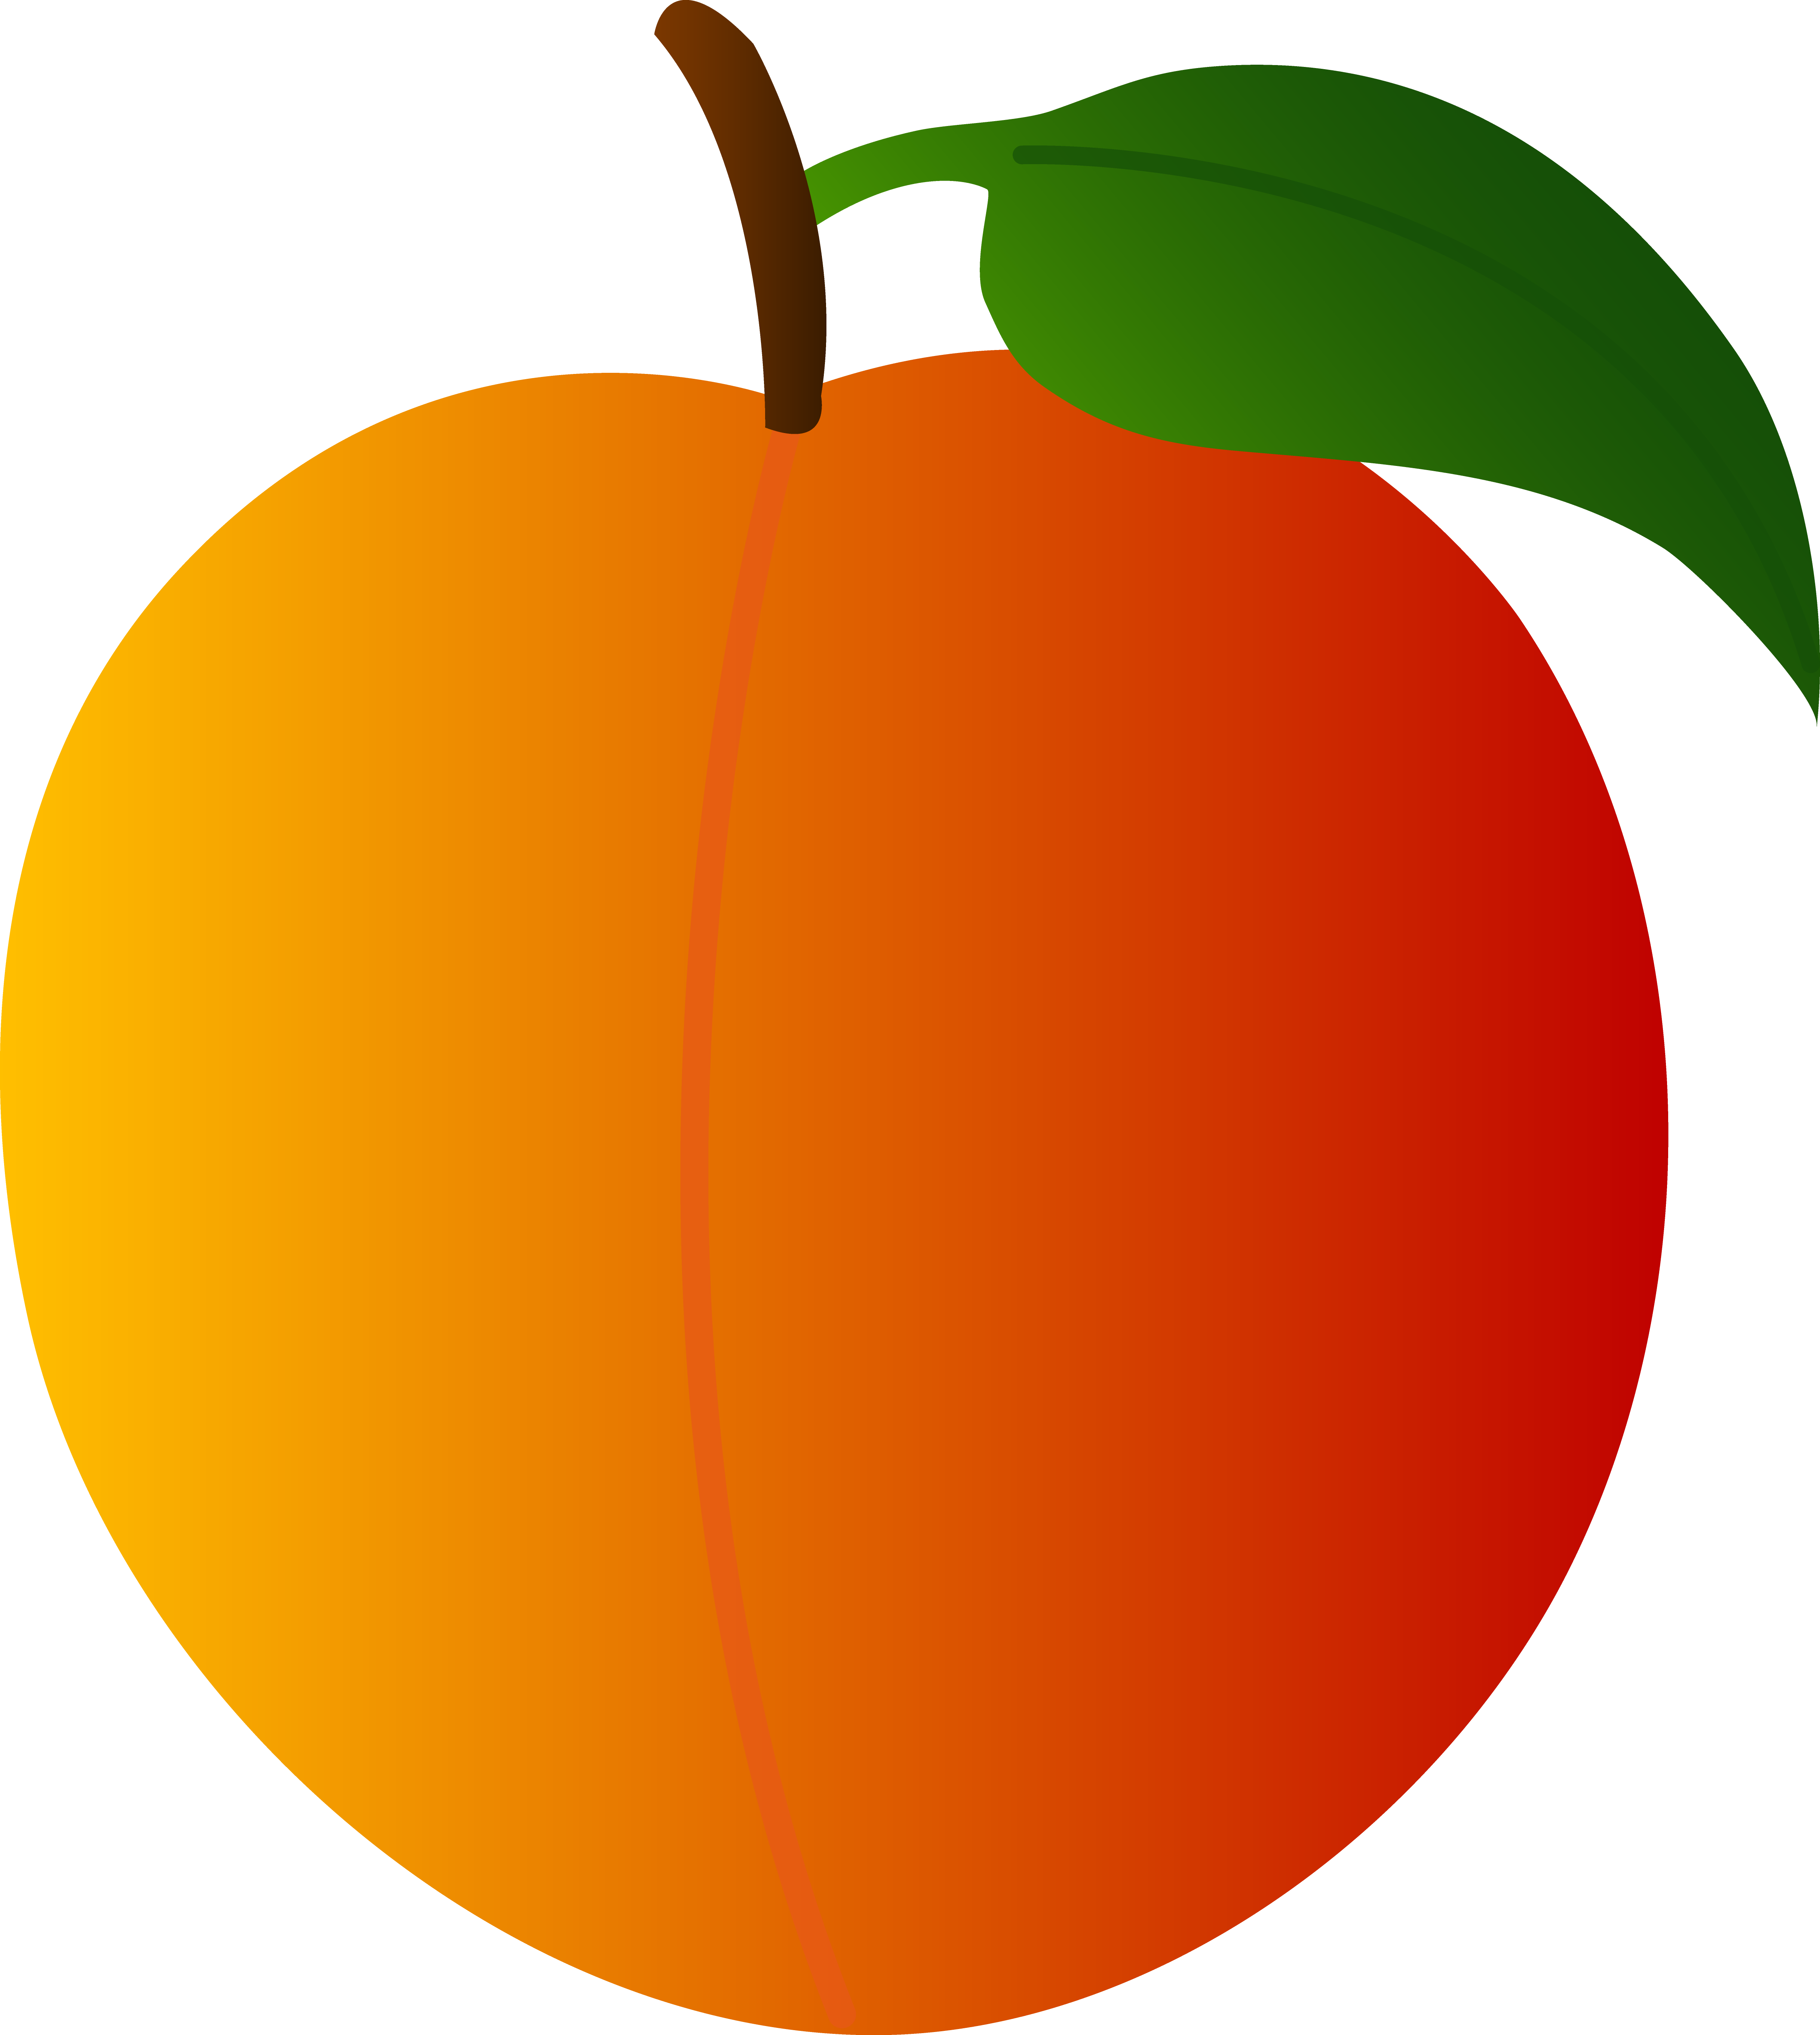 Fruits Clipart Images & Pictures - Becuo